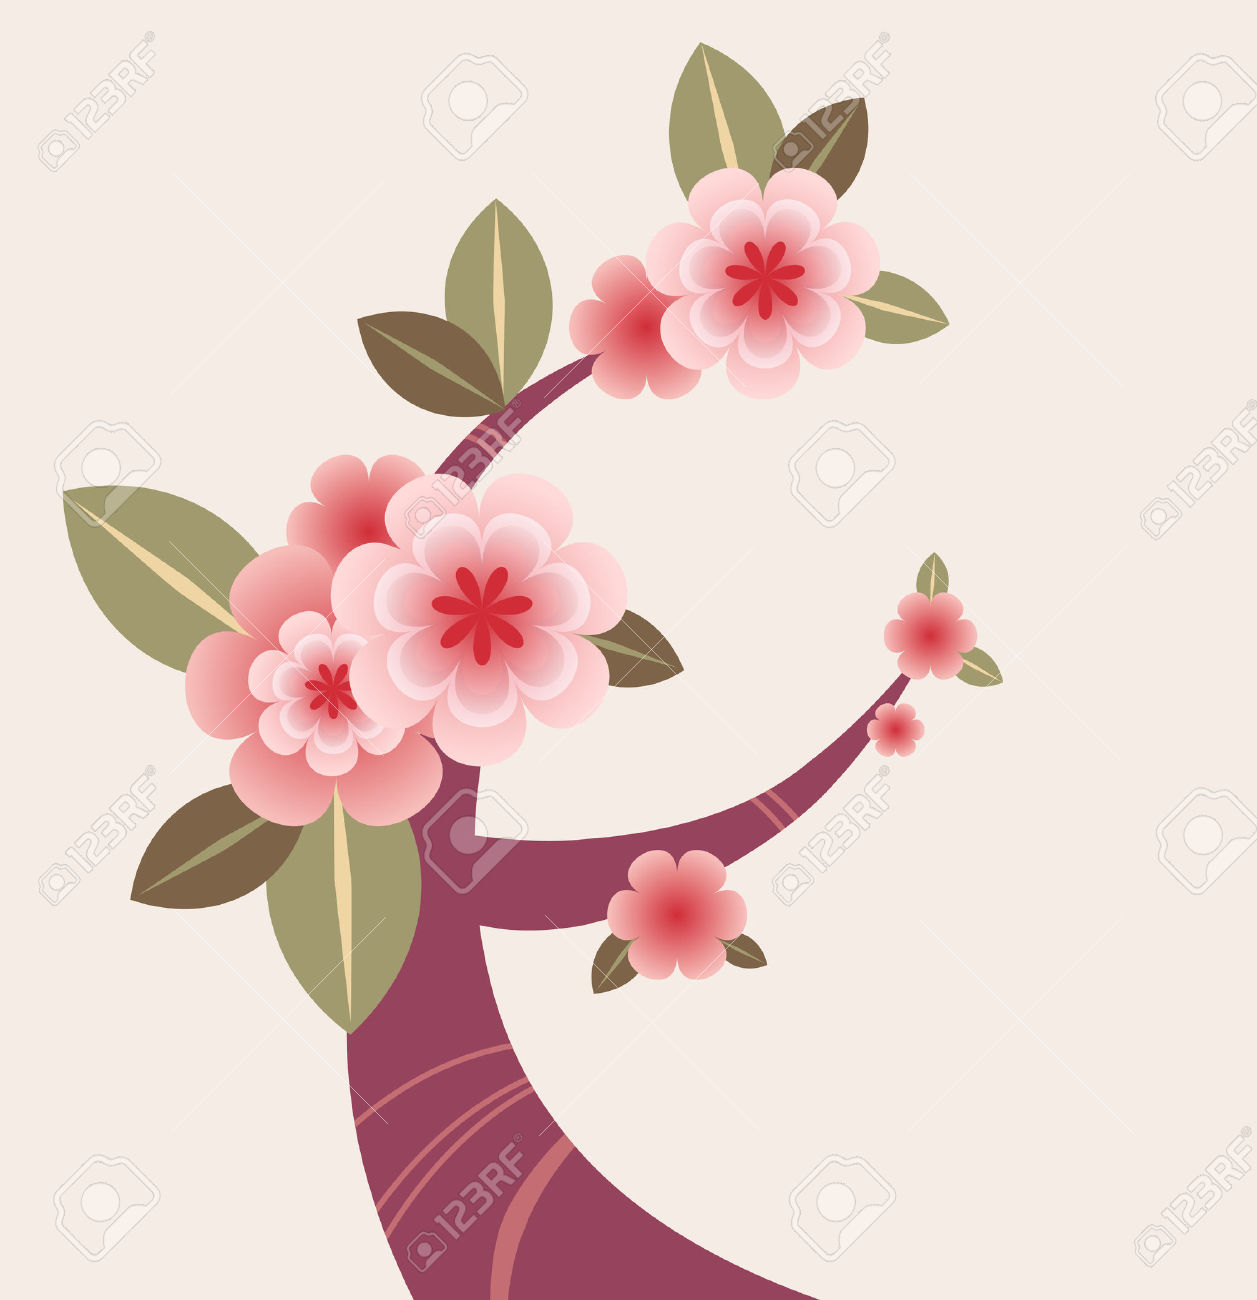 Blossom Tree Branch Royalty Free Cliparts, Vectors, And Stock.